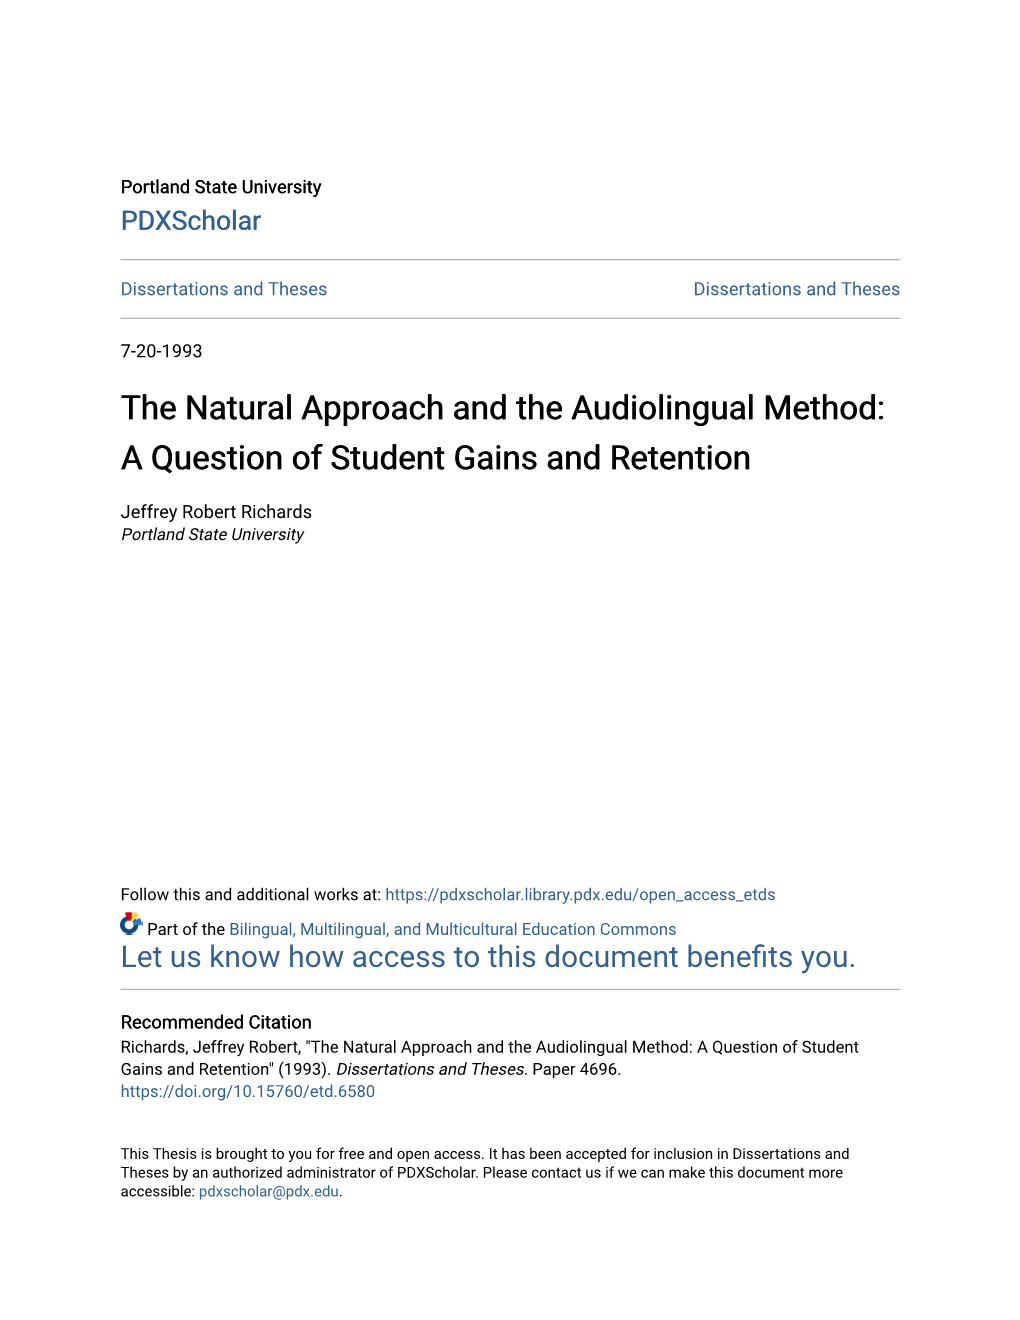 The Natural Approach and the Audiolingual Method: a Question of Student Gains and Retention